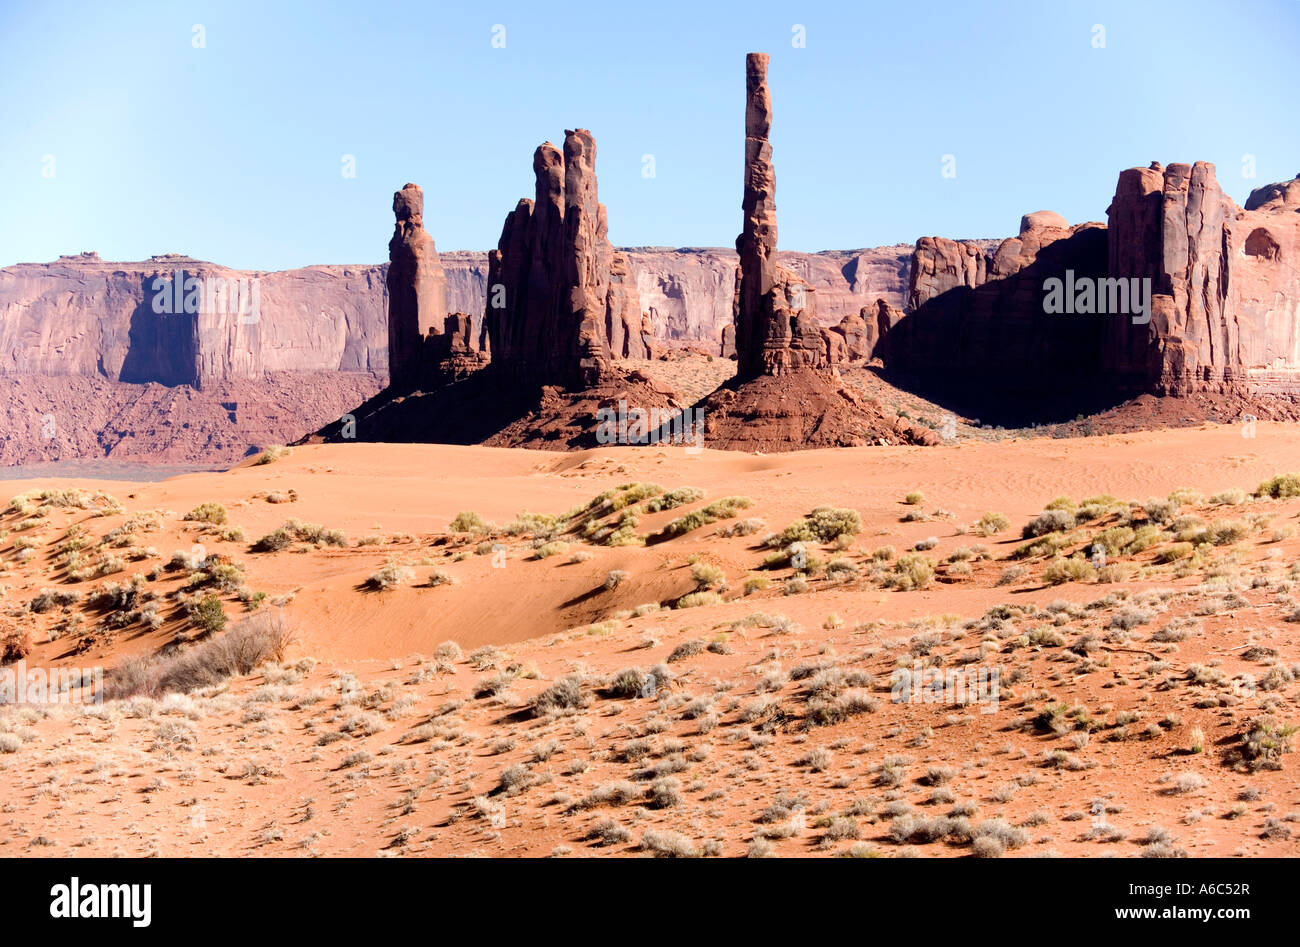 Totem pole like rock formation in Yei Bi Chei area in the Valley of the Gods Utah located near Mexican Hat Stock Photo